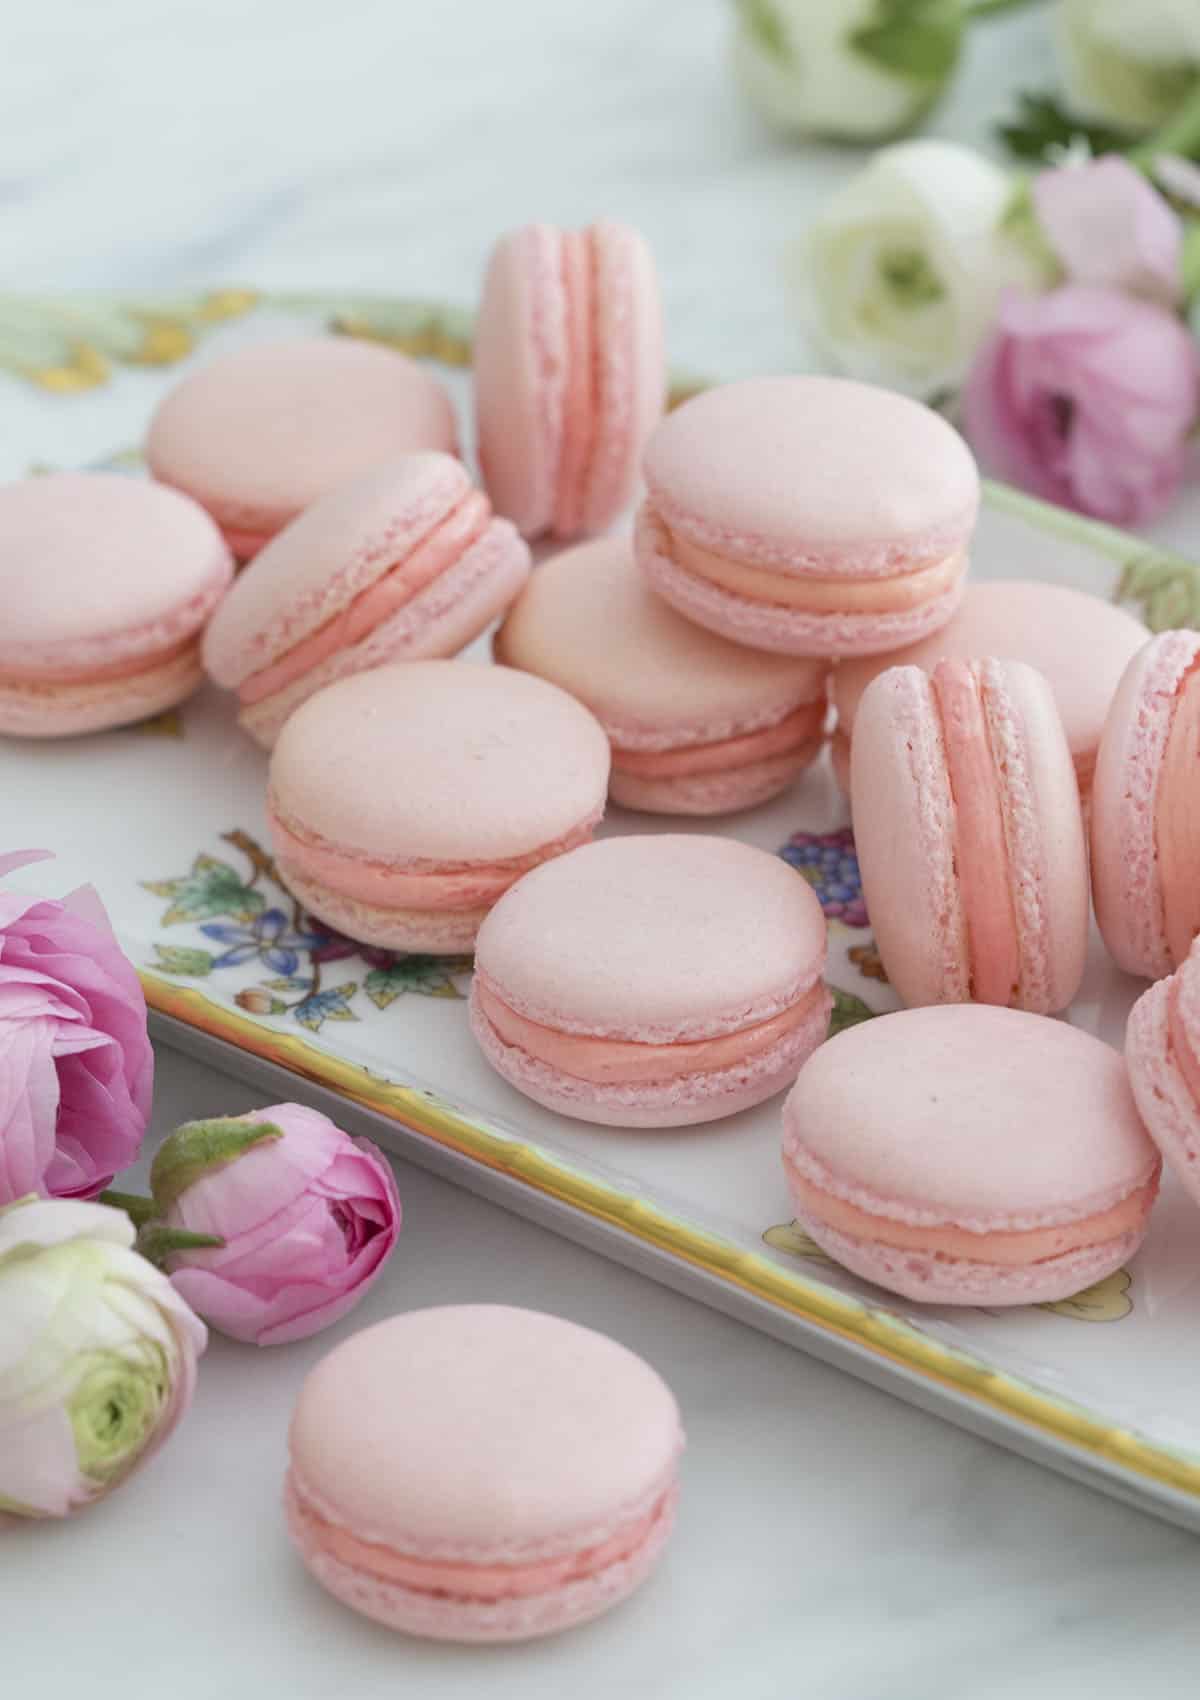 A group of pink macarons on a serving tray next to flowers